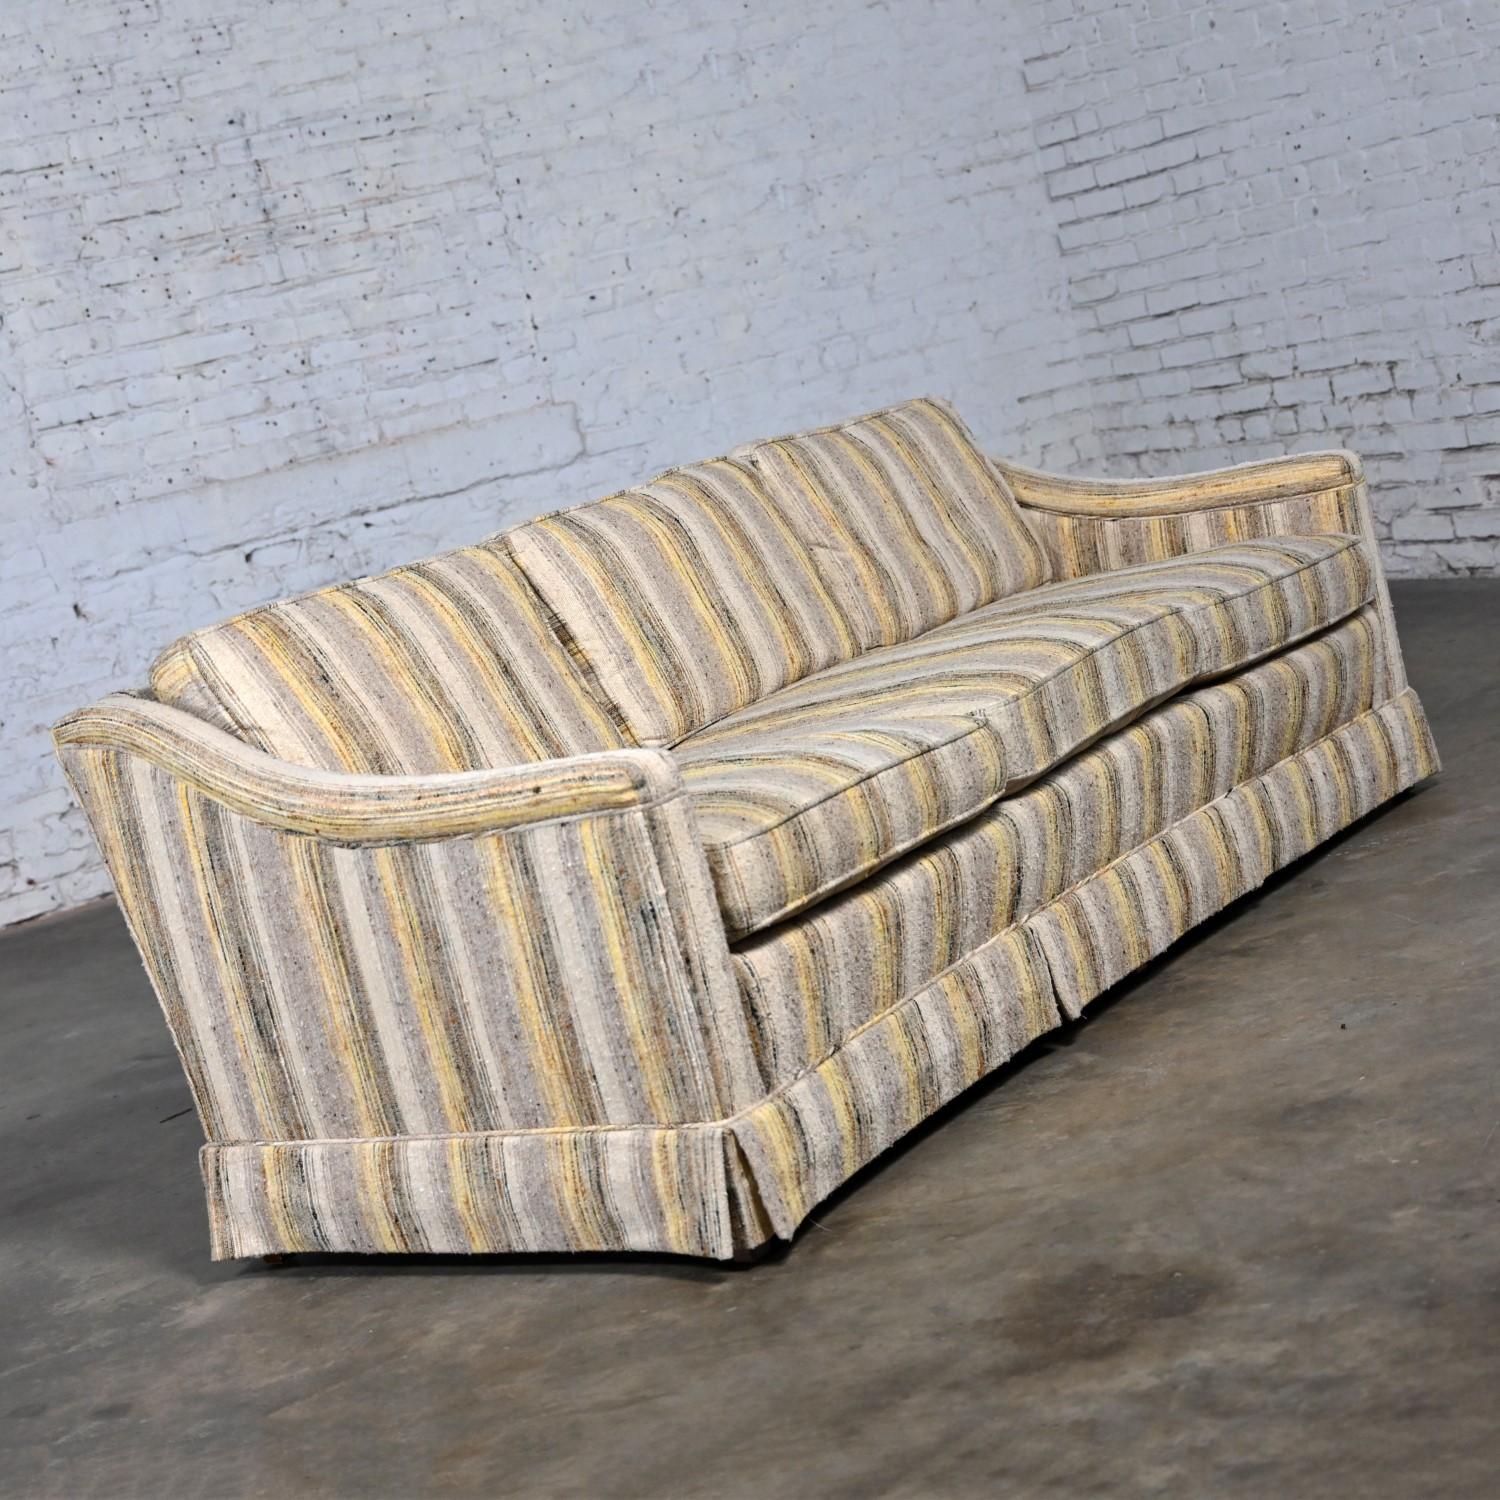 Mid-Century Modern Henredon Sofa Modified Lawson Style Yellow & Beige Striped For Sale 3